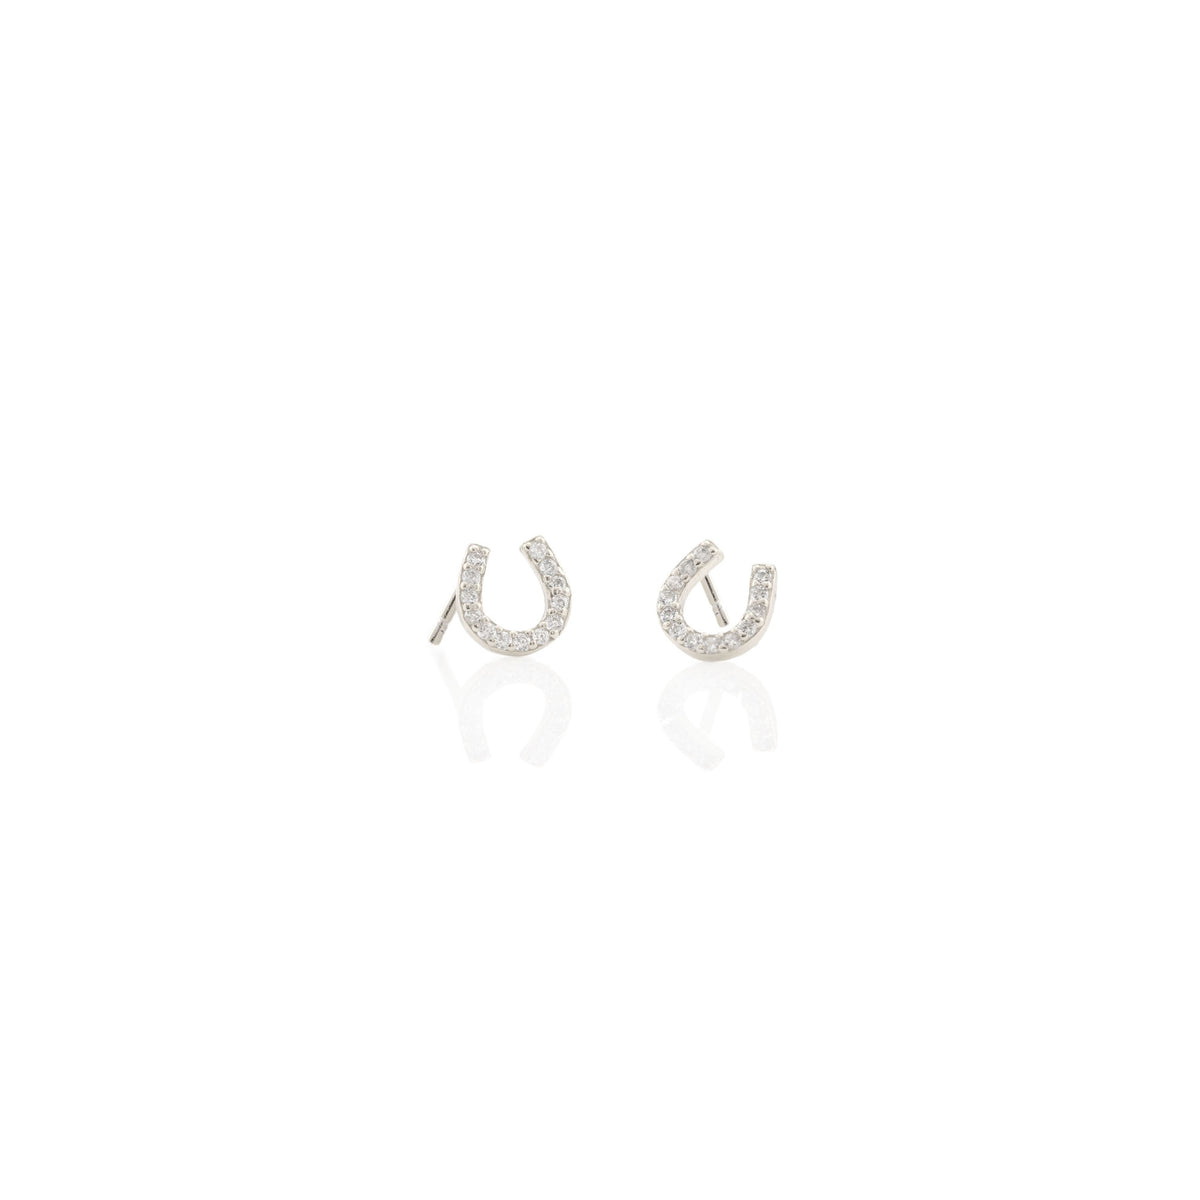 Horseshoe Pave Stud Earrings - Gold Vermeil or Sterling Silver Sterling Silver